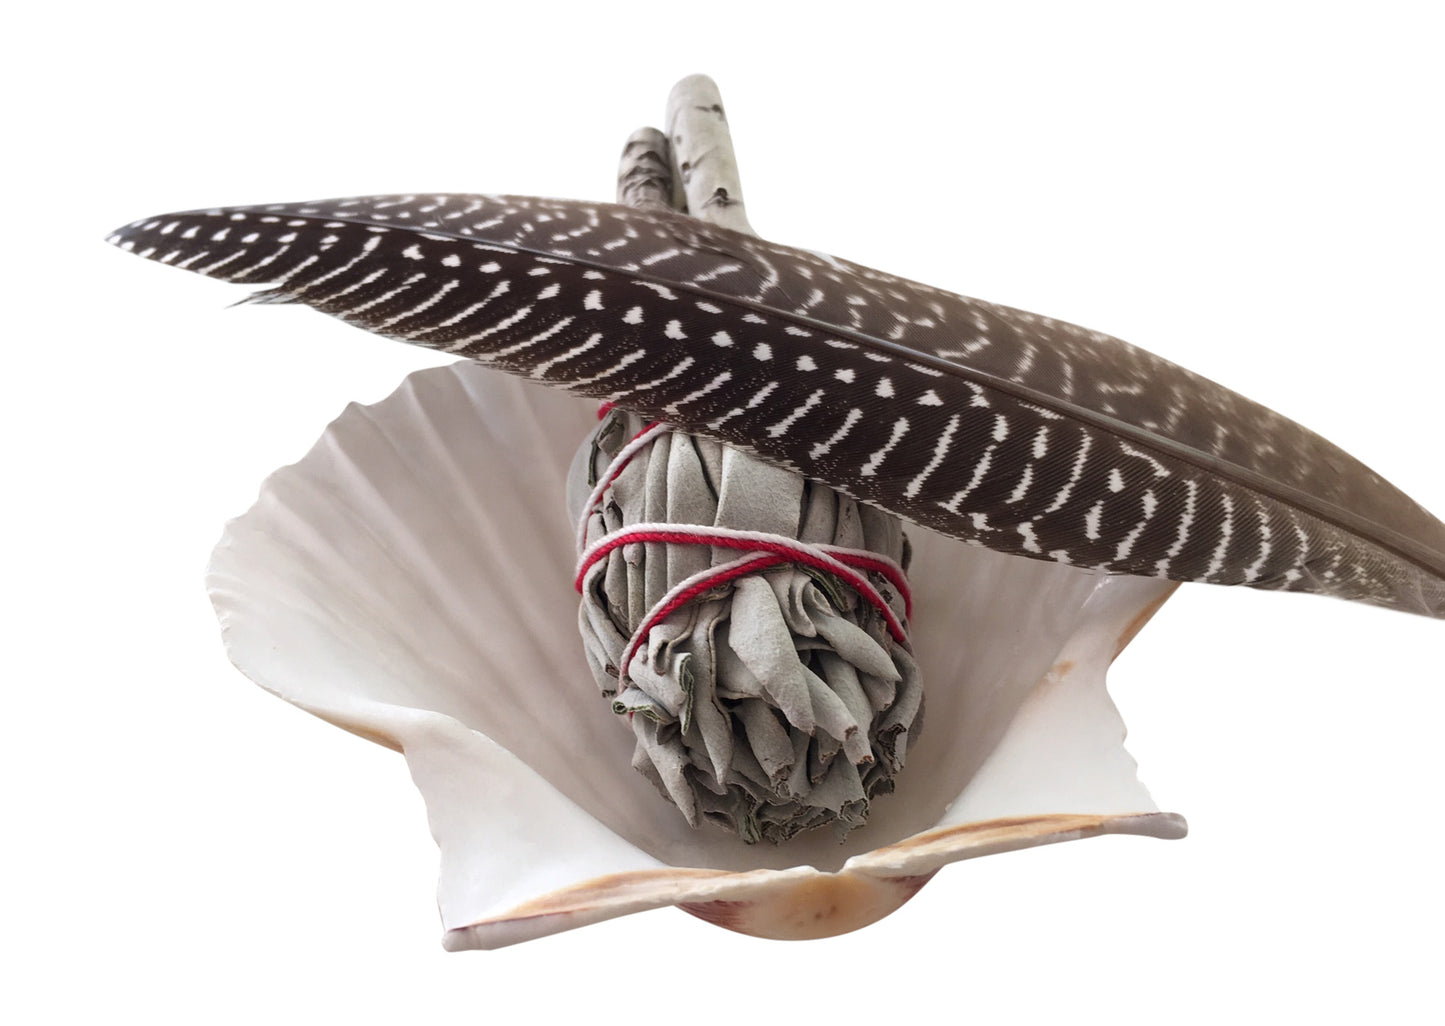 Scallop Shell plus Californian White Sage Smudge and Feather Smudging Kit